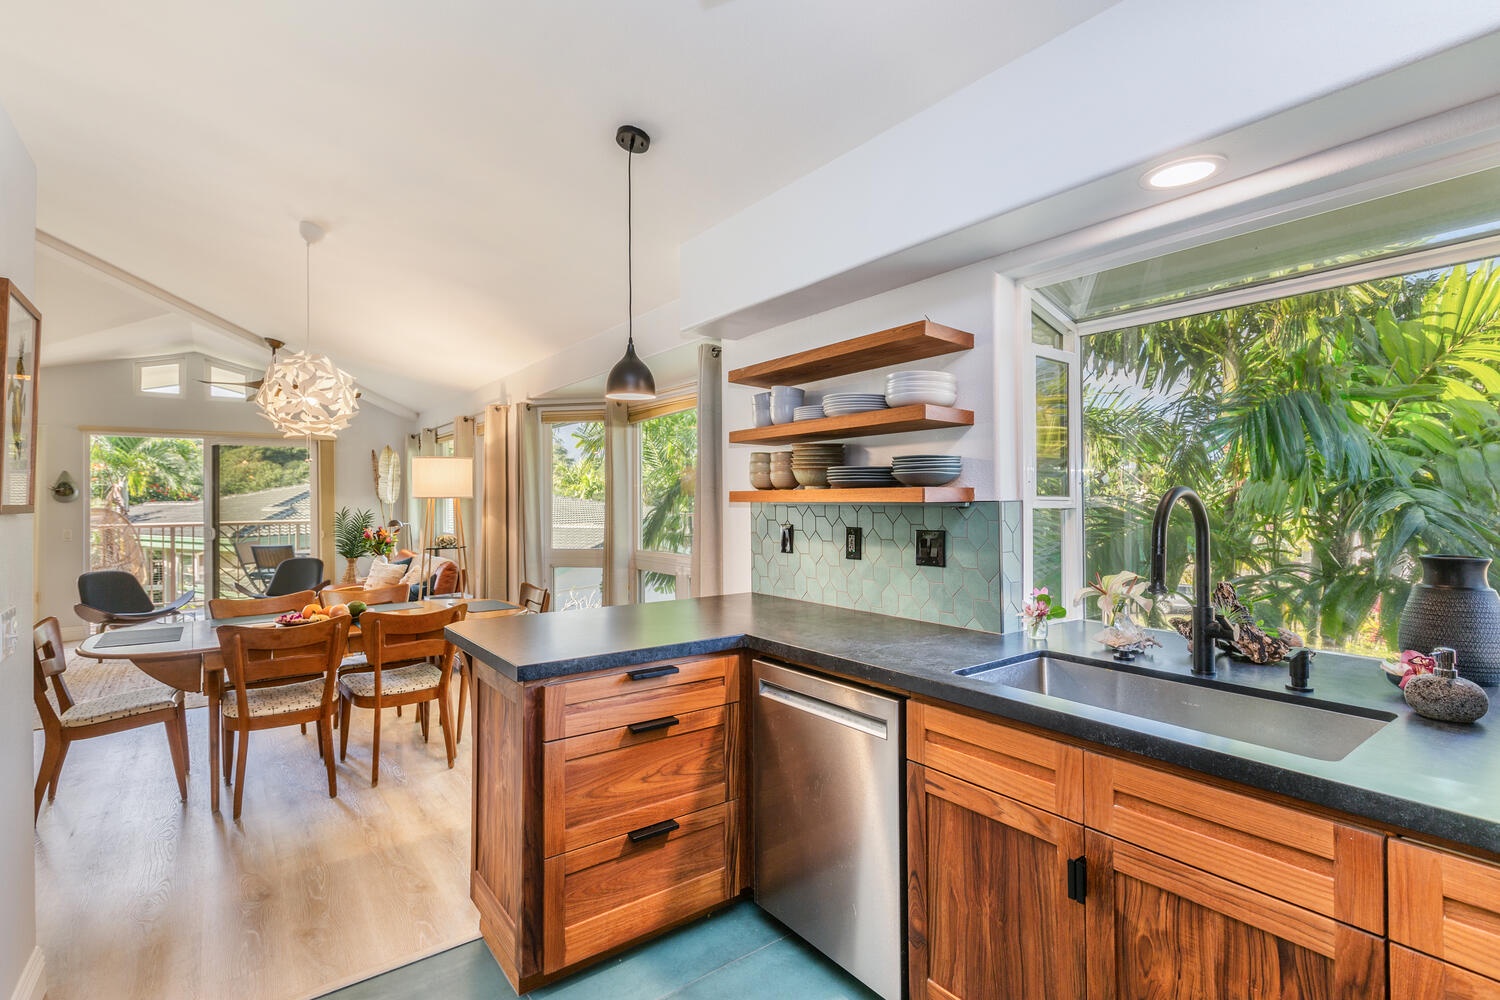 Princeville Vacation Rentals, Sea Glass - Seamless flow between the kitchen, dining and living areas, even stretching out to the lanai.